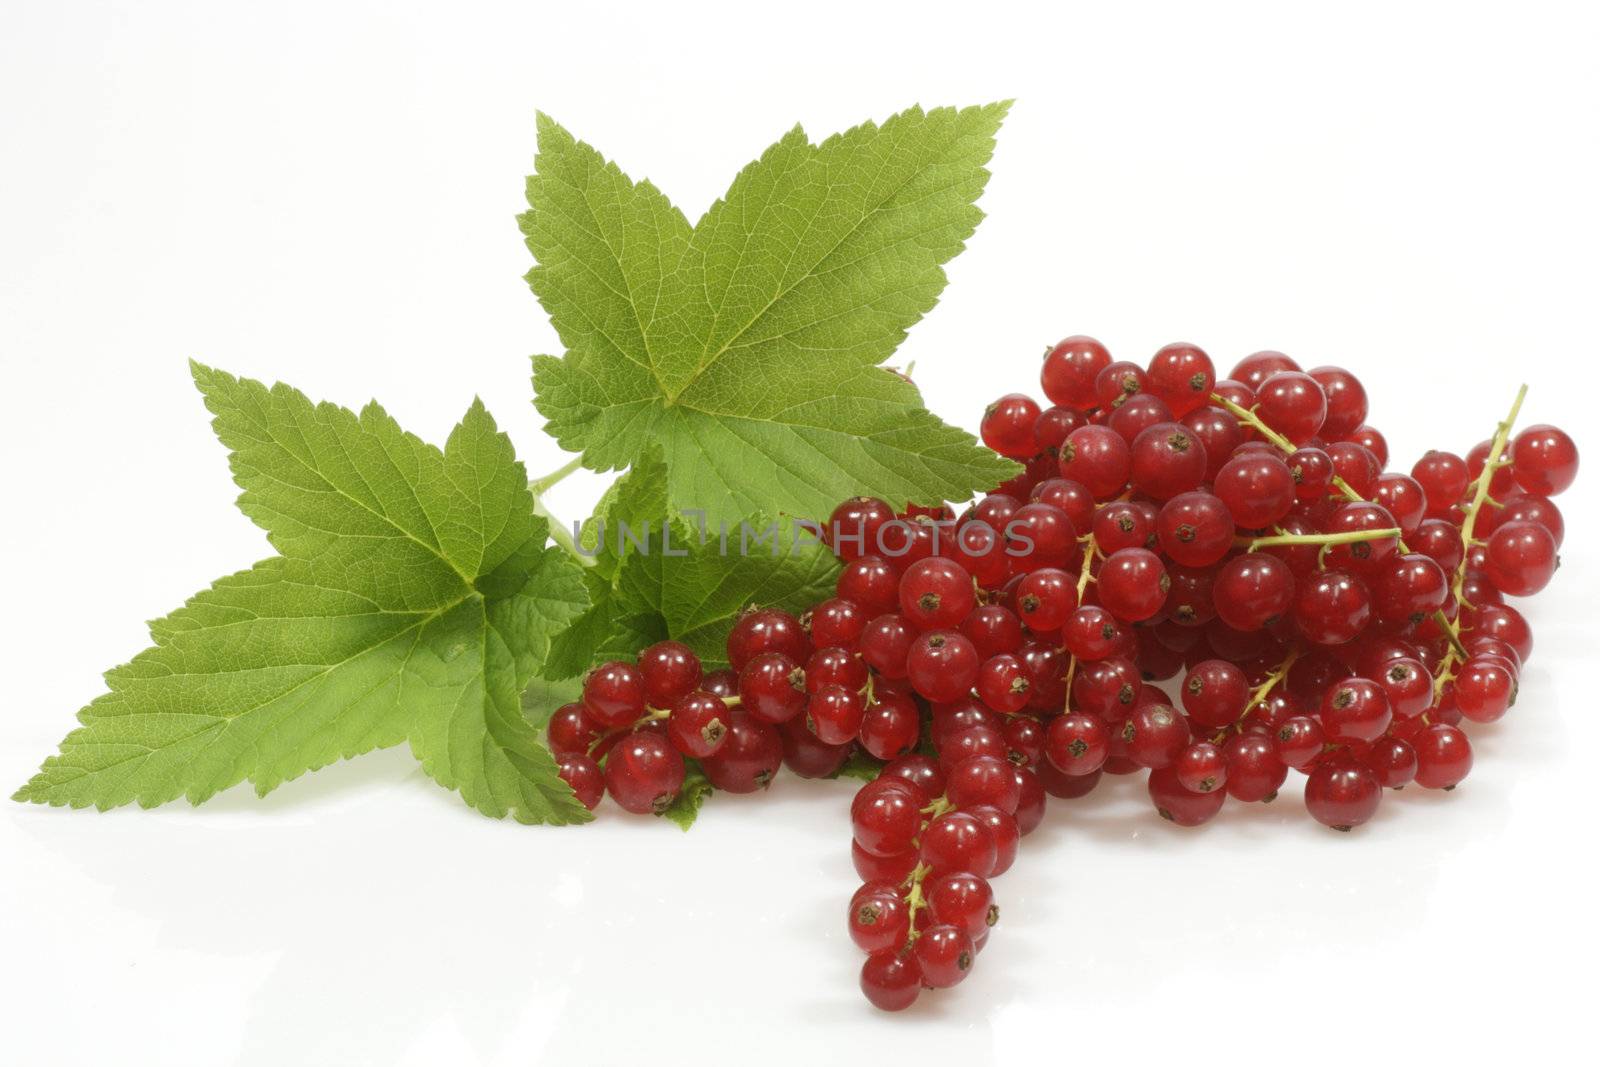 Red currants by Teamarbeit